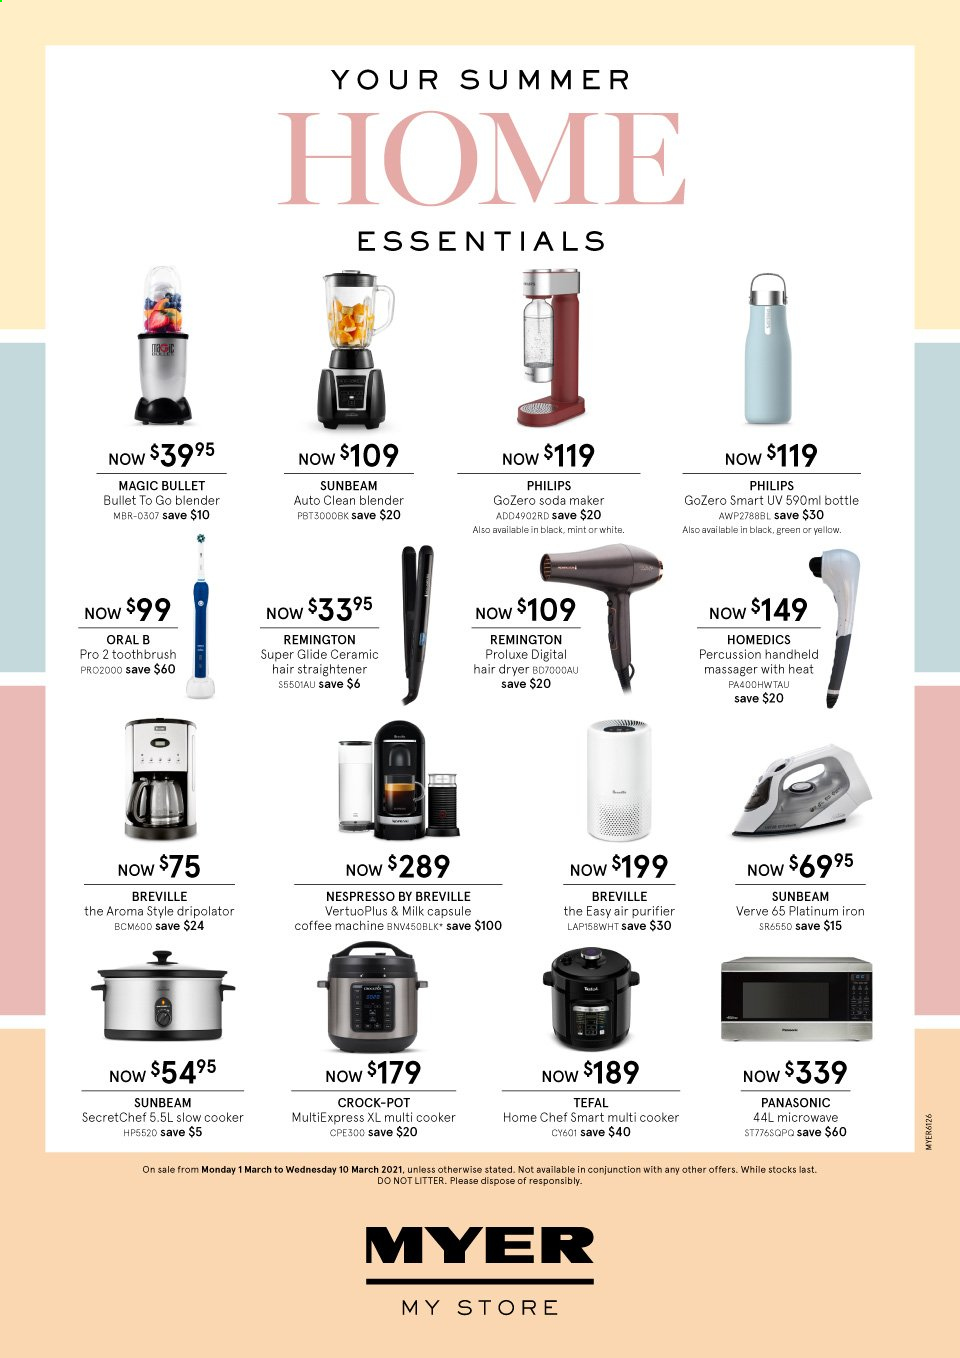 thumbnail - Myer Catalogue - 1 Mar 2021 - 10 Mar 2021 - Sales products - Philips, Panasonic, Tefal, pot, percussion instrument, Sunbeam, microwave, air purifier, coffee machine, Nespresso, capsule coffee machine, blender, multifunction cooker, slow cooker, platinum iron, iron, Oral-B, Remington, massager, hair dryer, straightener. Page 1.